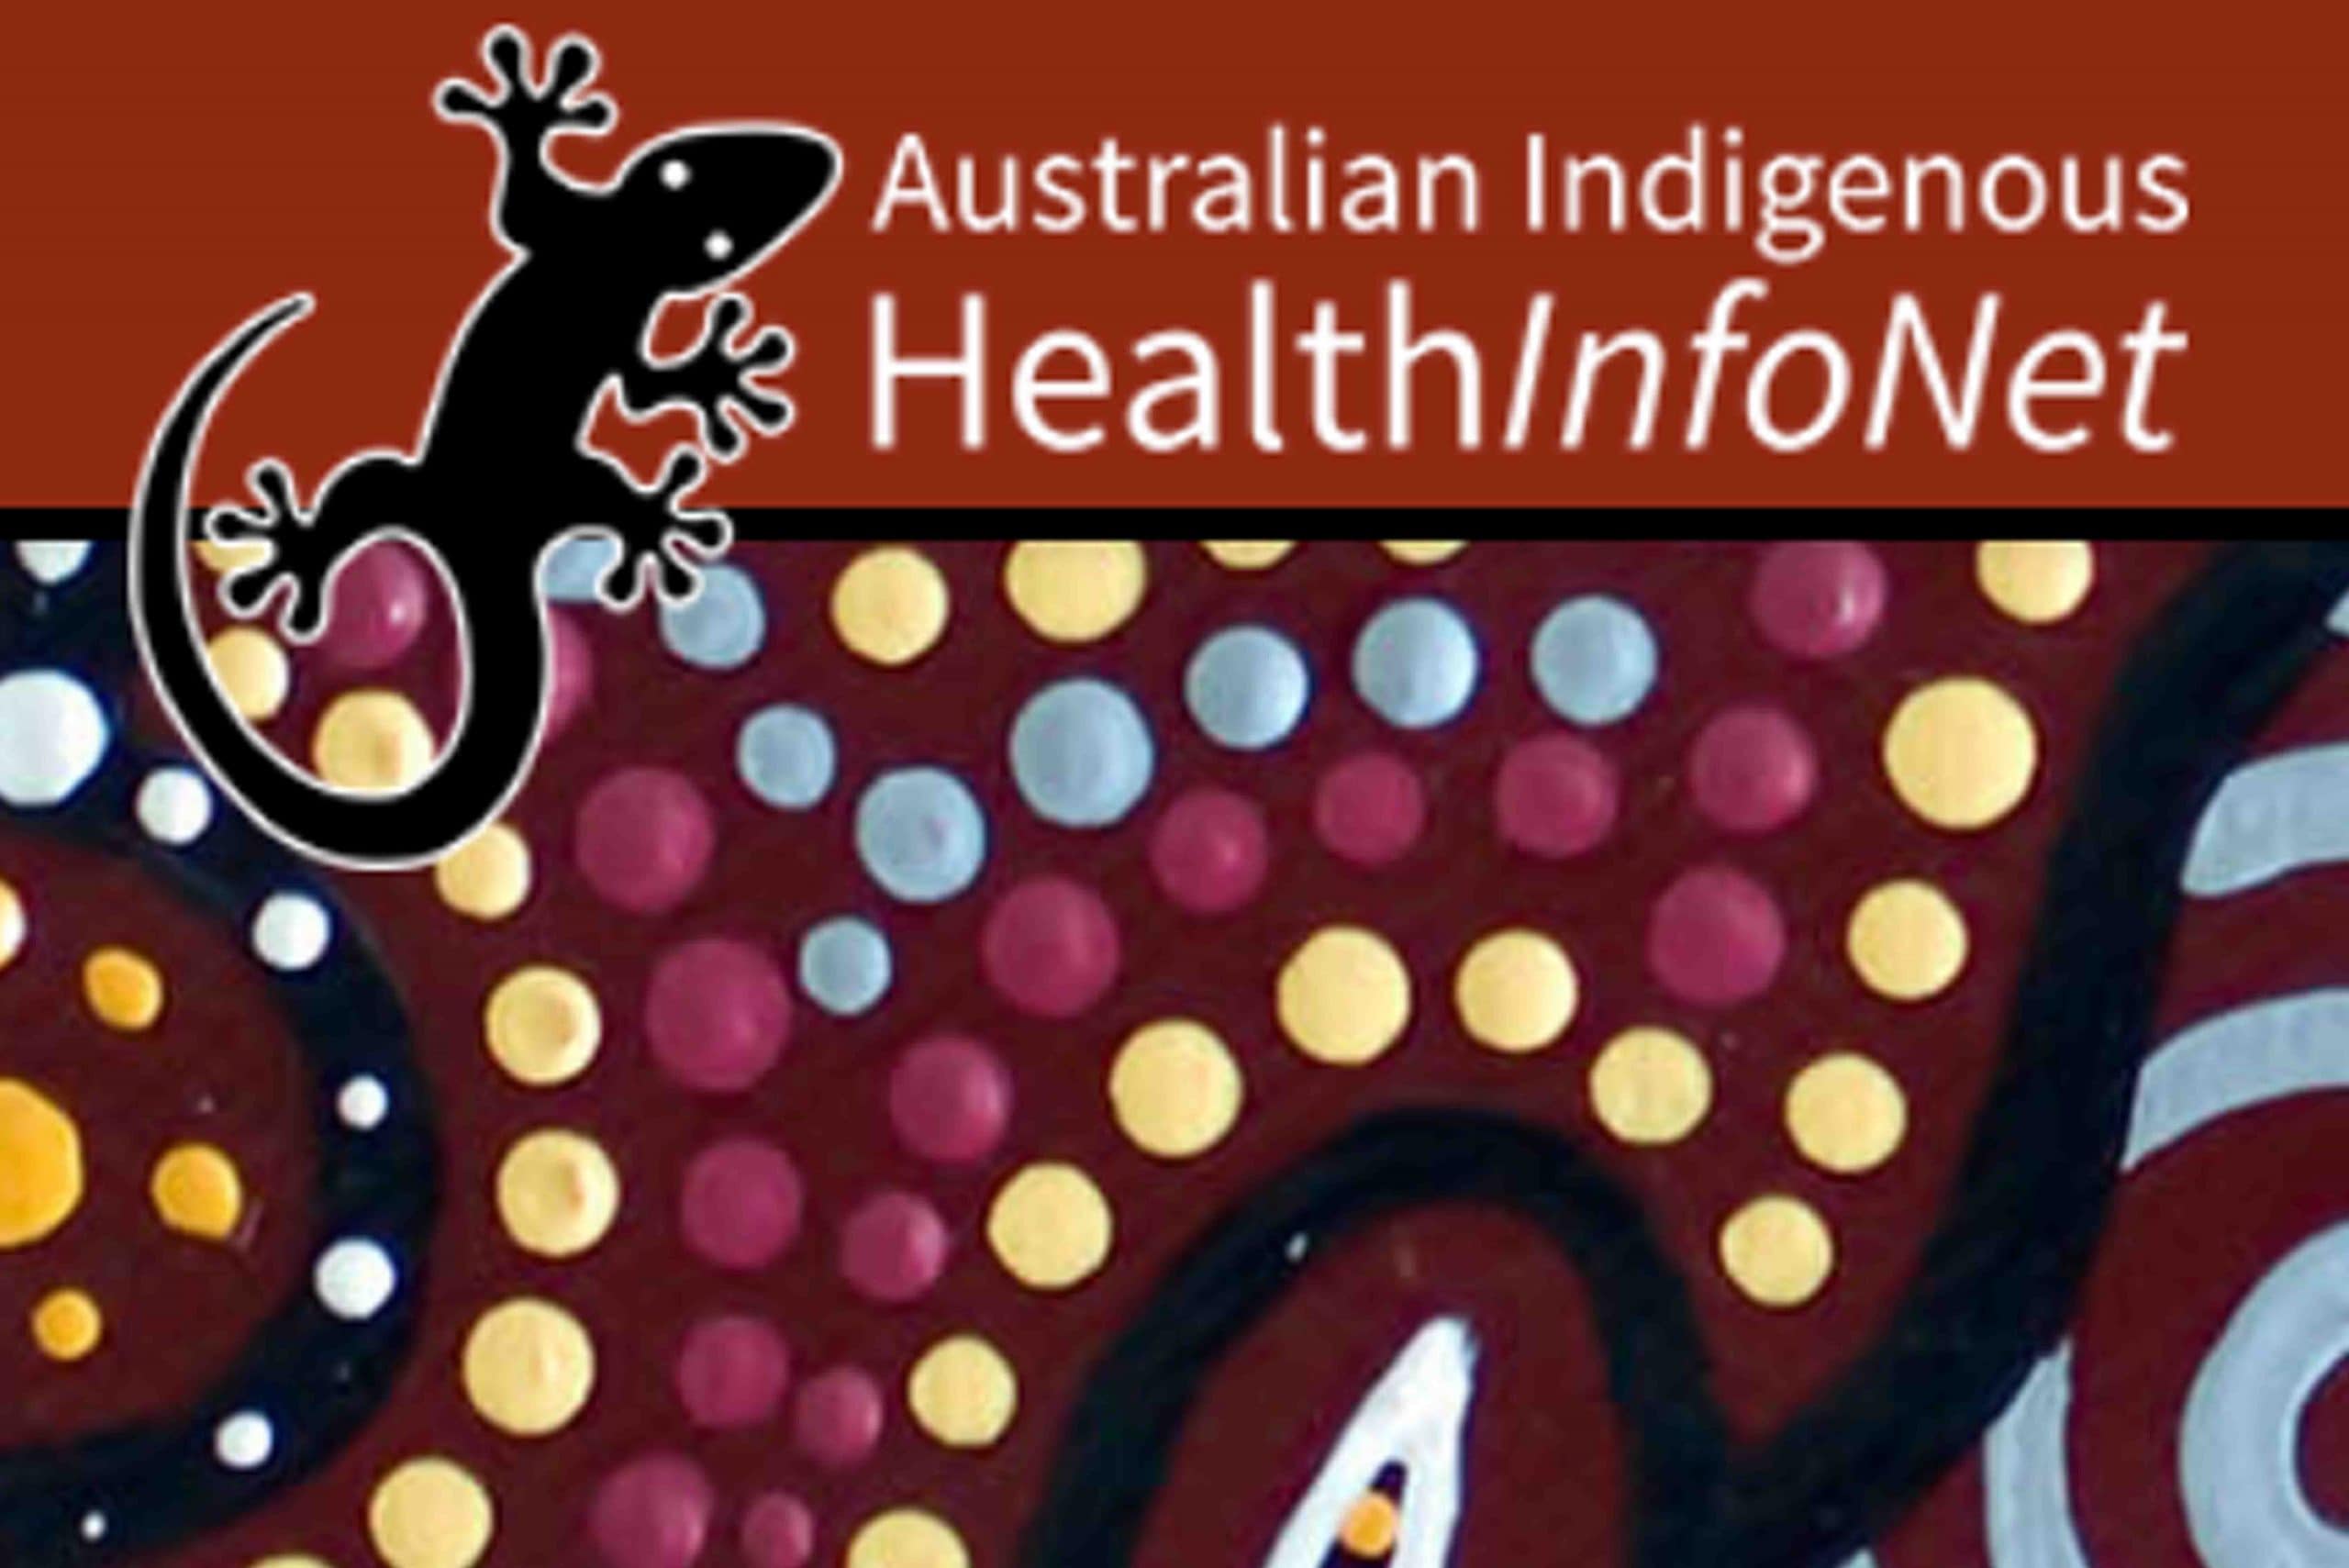 Image features Indigenous Australian art. At the top is a black lizard the text next to it reads Australian Indigenous Health Info Net